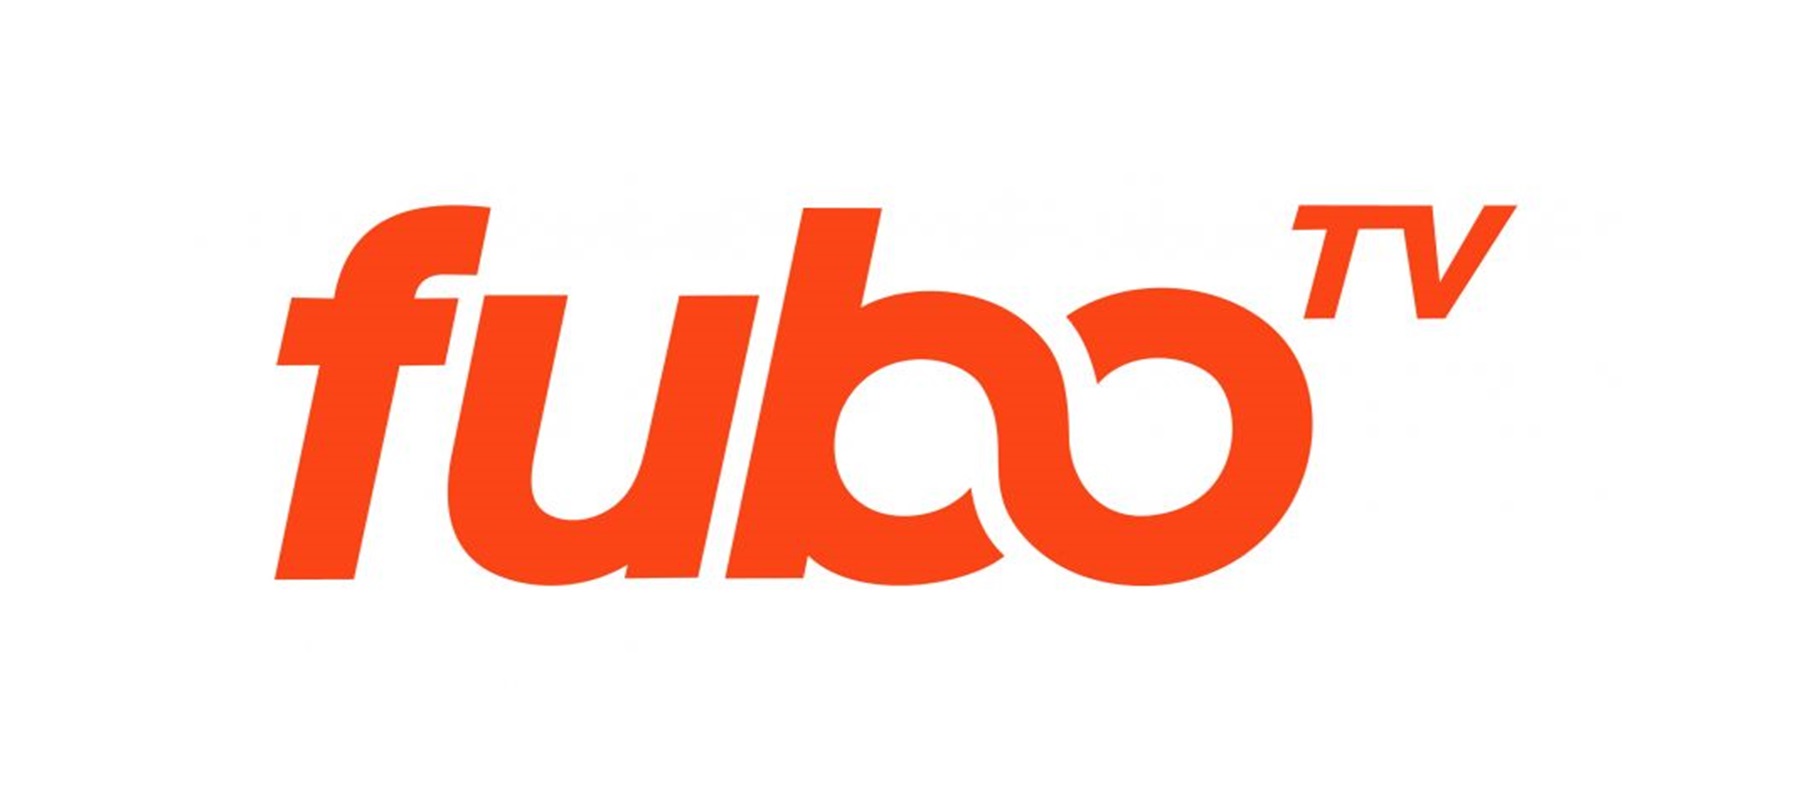 TV streaming platform Fubo and EDO partner to measure Connected TV ad engagement